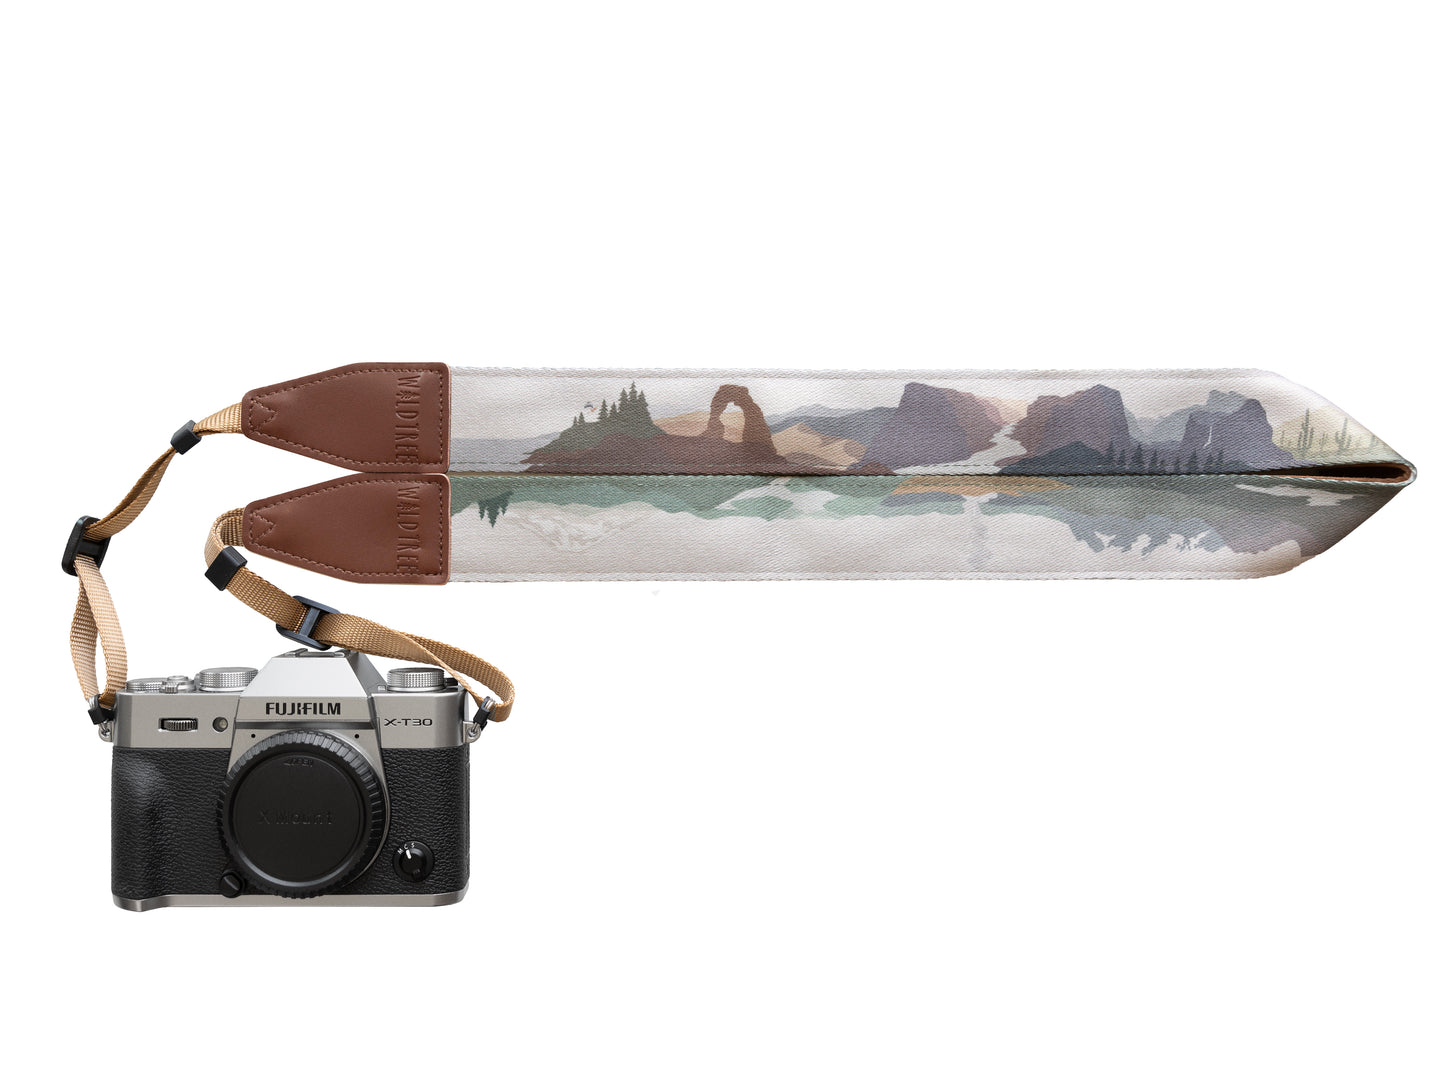 USA National parks camera strap by wildtree in color. features 11 national parks, brown leather ends and backing